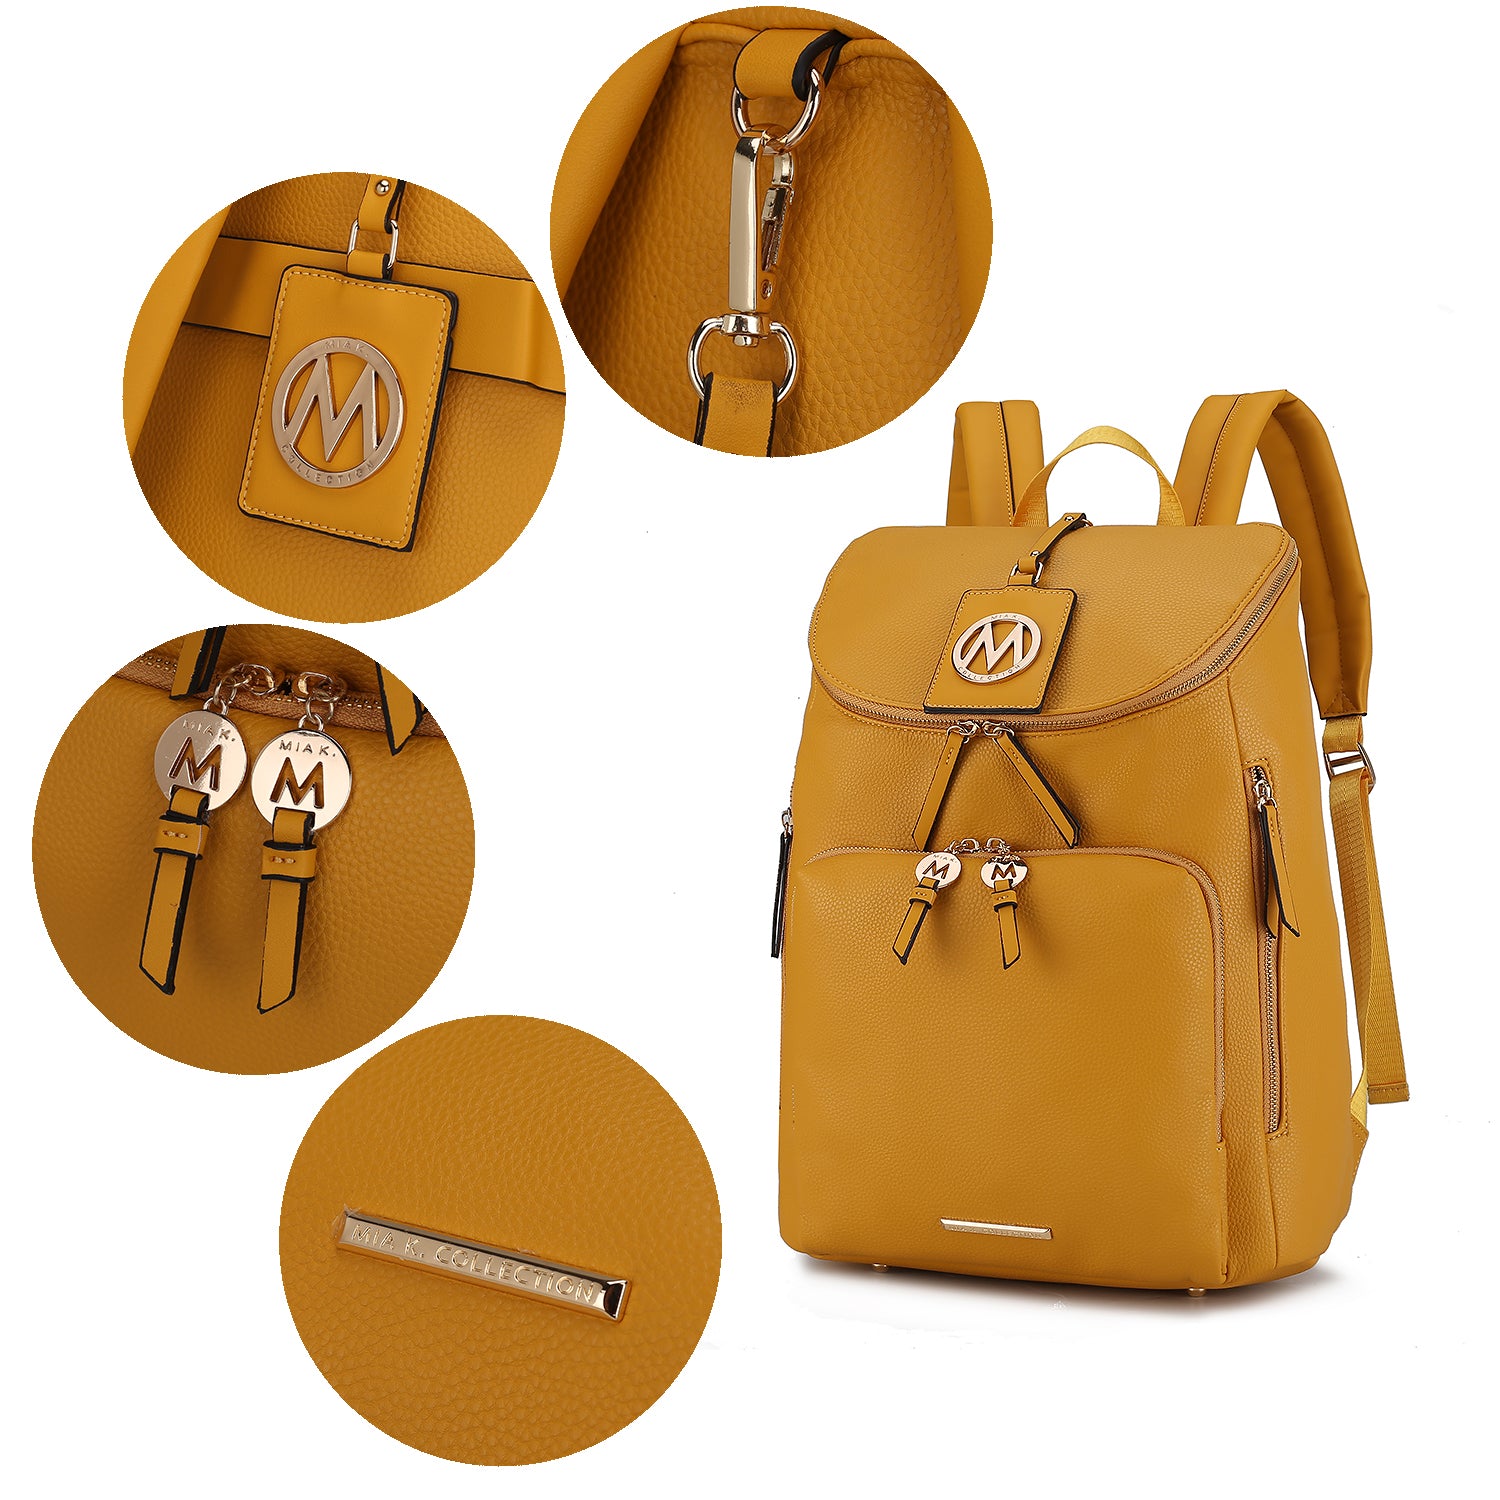 The Angela Large Backpack Vegan Leather by Pink Orpheus is a yellow, stylish and functional accessory with zippered pockets, adjustable shoulder straps, metal clasps and detailing, crafted from high quality vegan leather. It features a circular emblem with a stylized "M." Close-ups show the logo tag, zippers, and textured material.